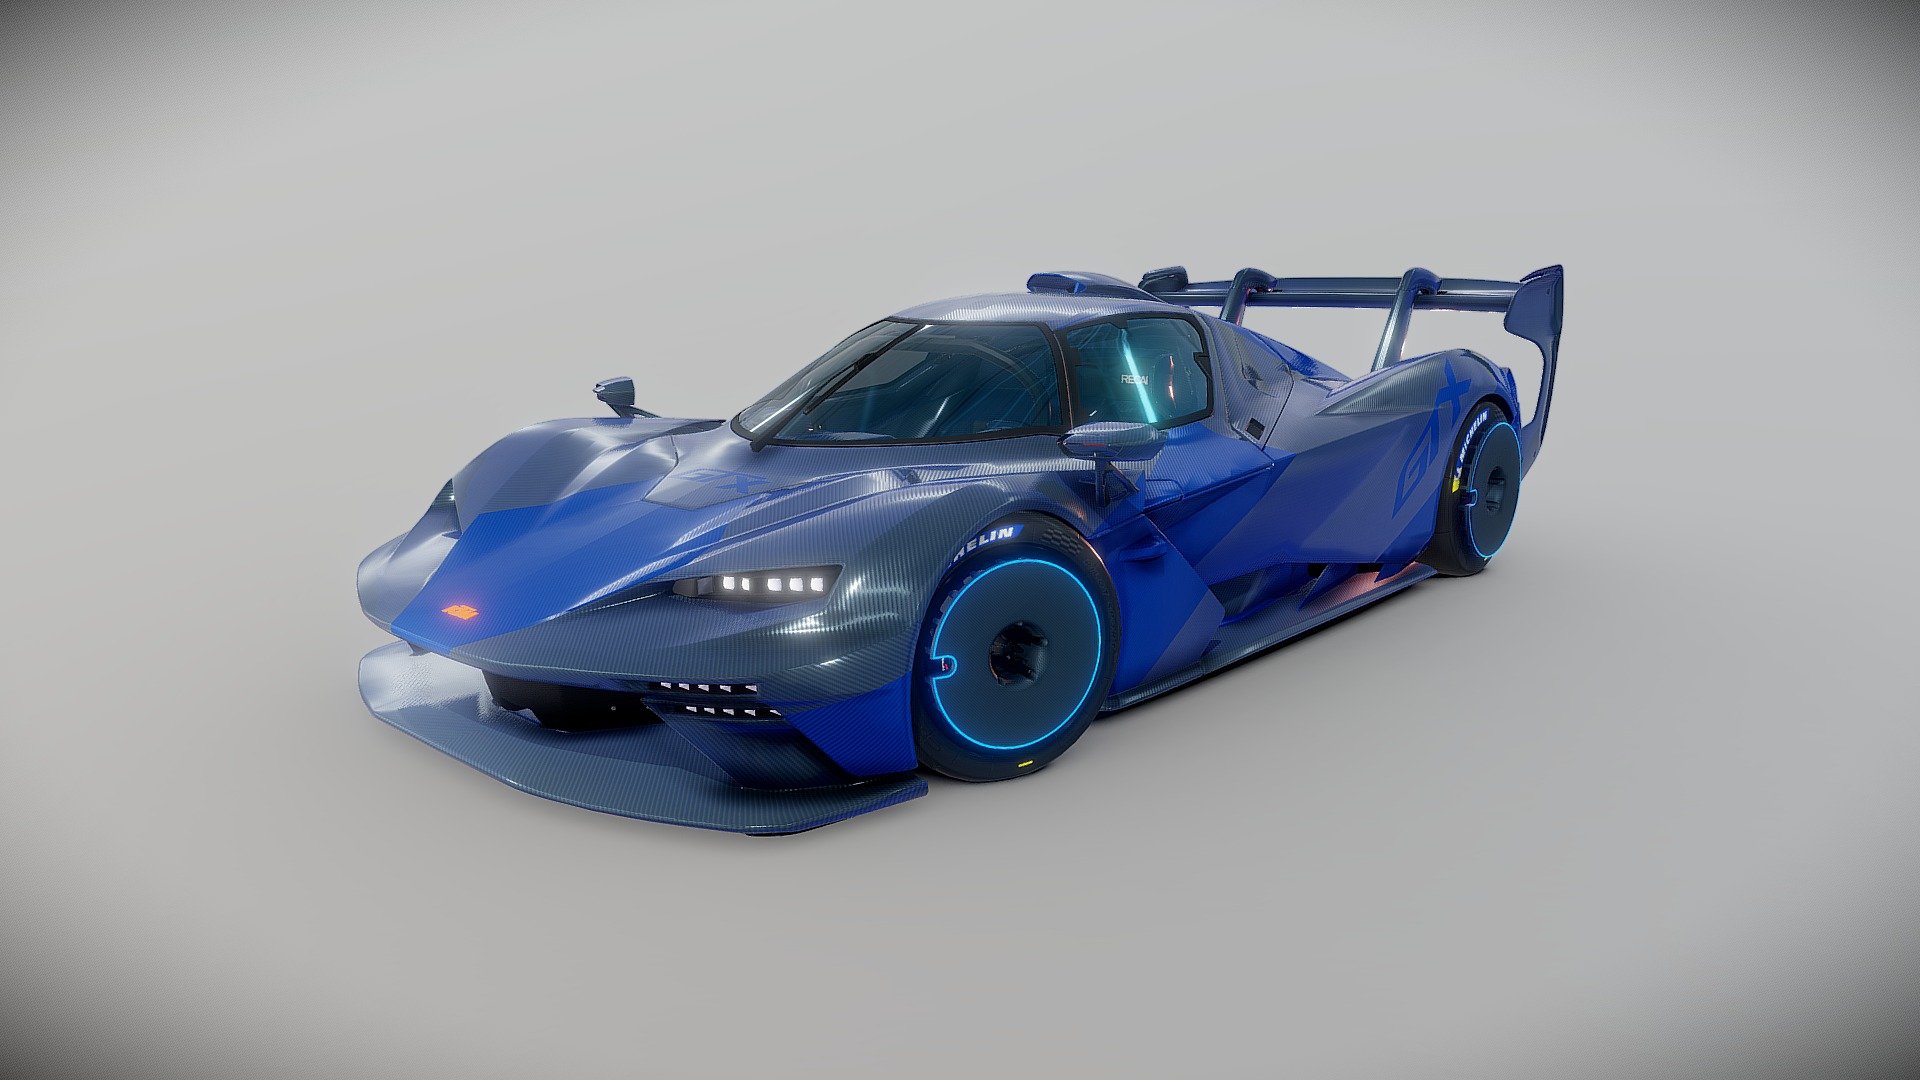 KTM X-Bow GTX my Version of GT

Asking for free downloads? it will never happen. 3d model